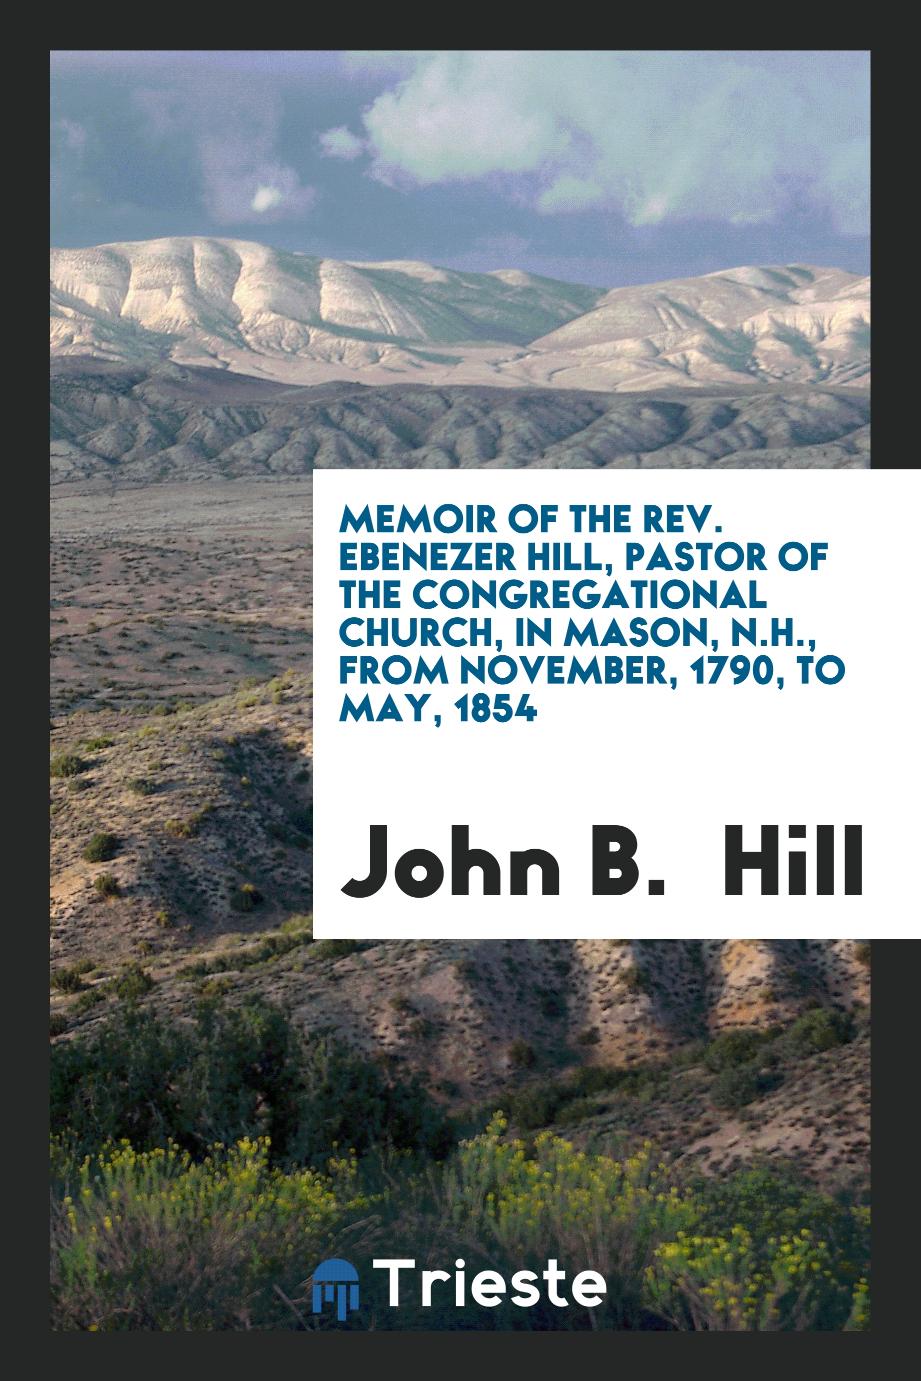 Memoir of the Rev. Ebenezer Hill, Pastor of the Congregational Church, in Mason, N.H., from November, 1790, to May, 1854